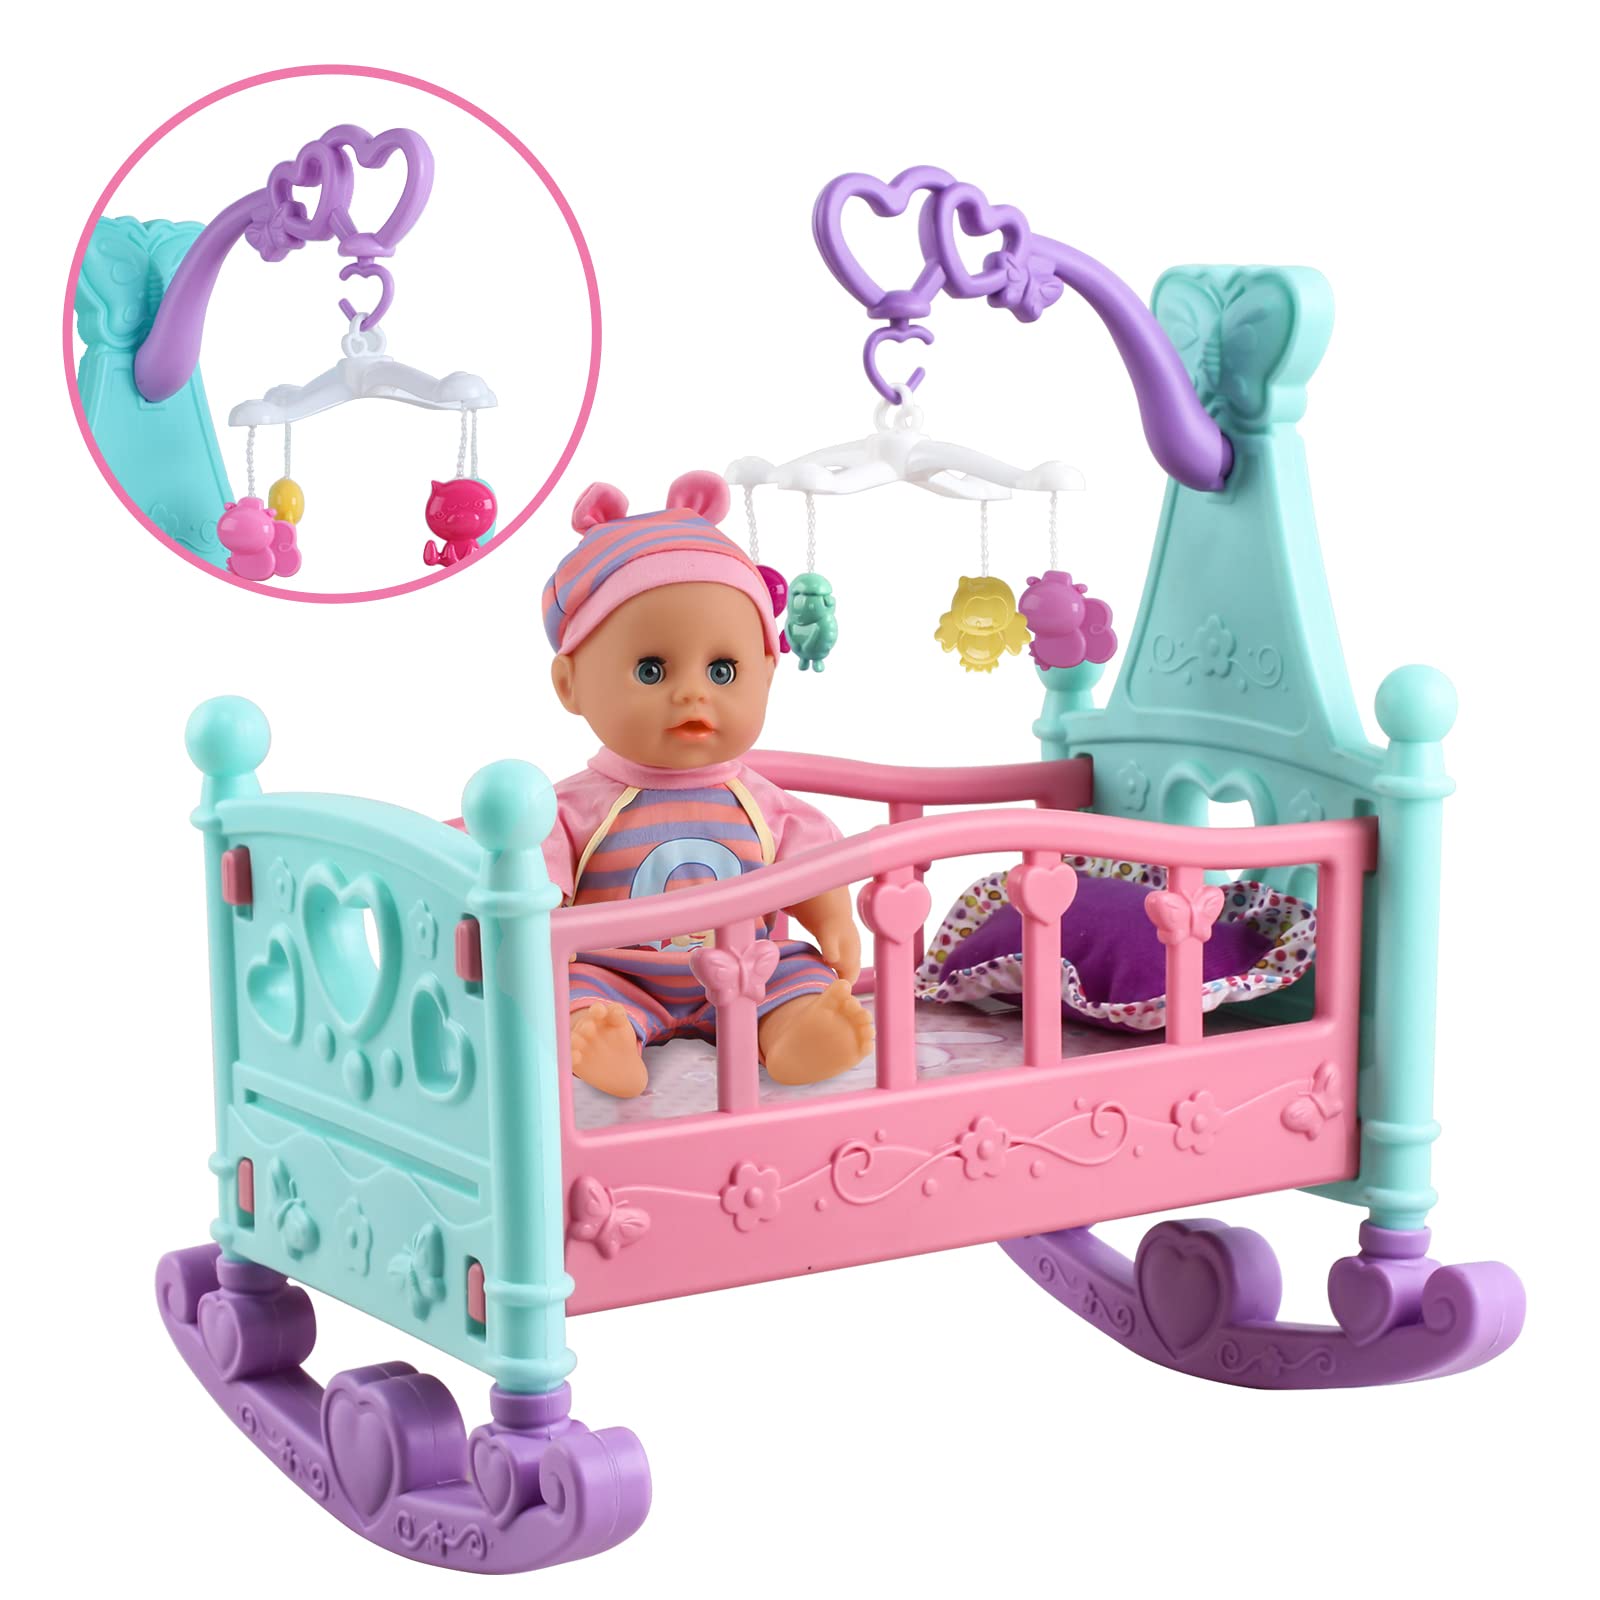 deAO Baby Doll Set with Crib Mobile High Chair Stroller Feeding Accessories 21 Pieces Play Set (Baby Doll Included)